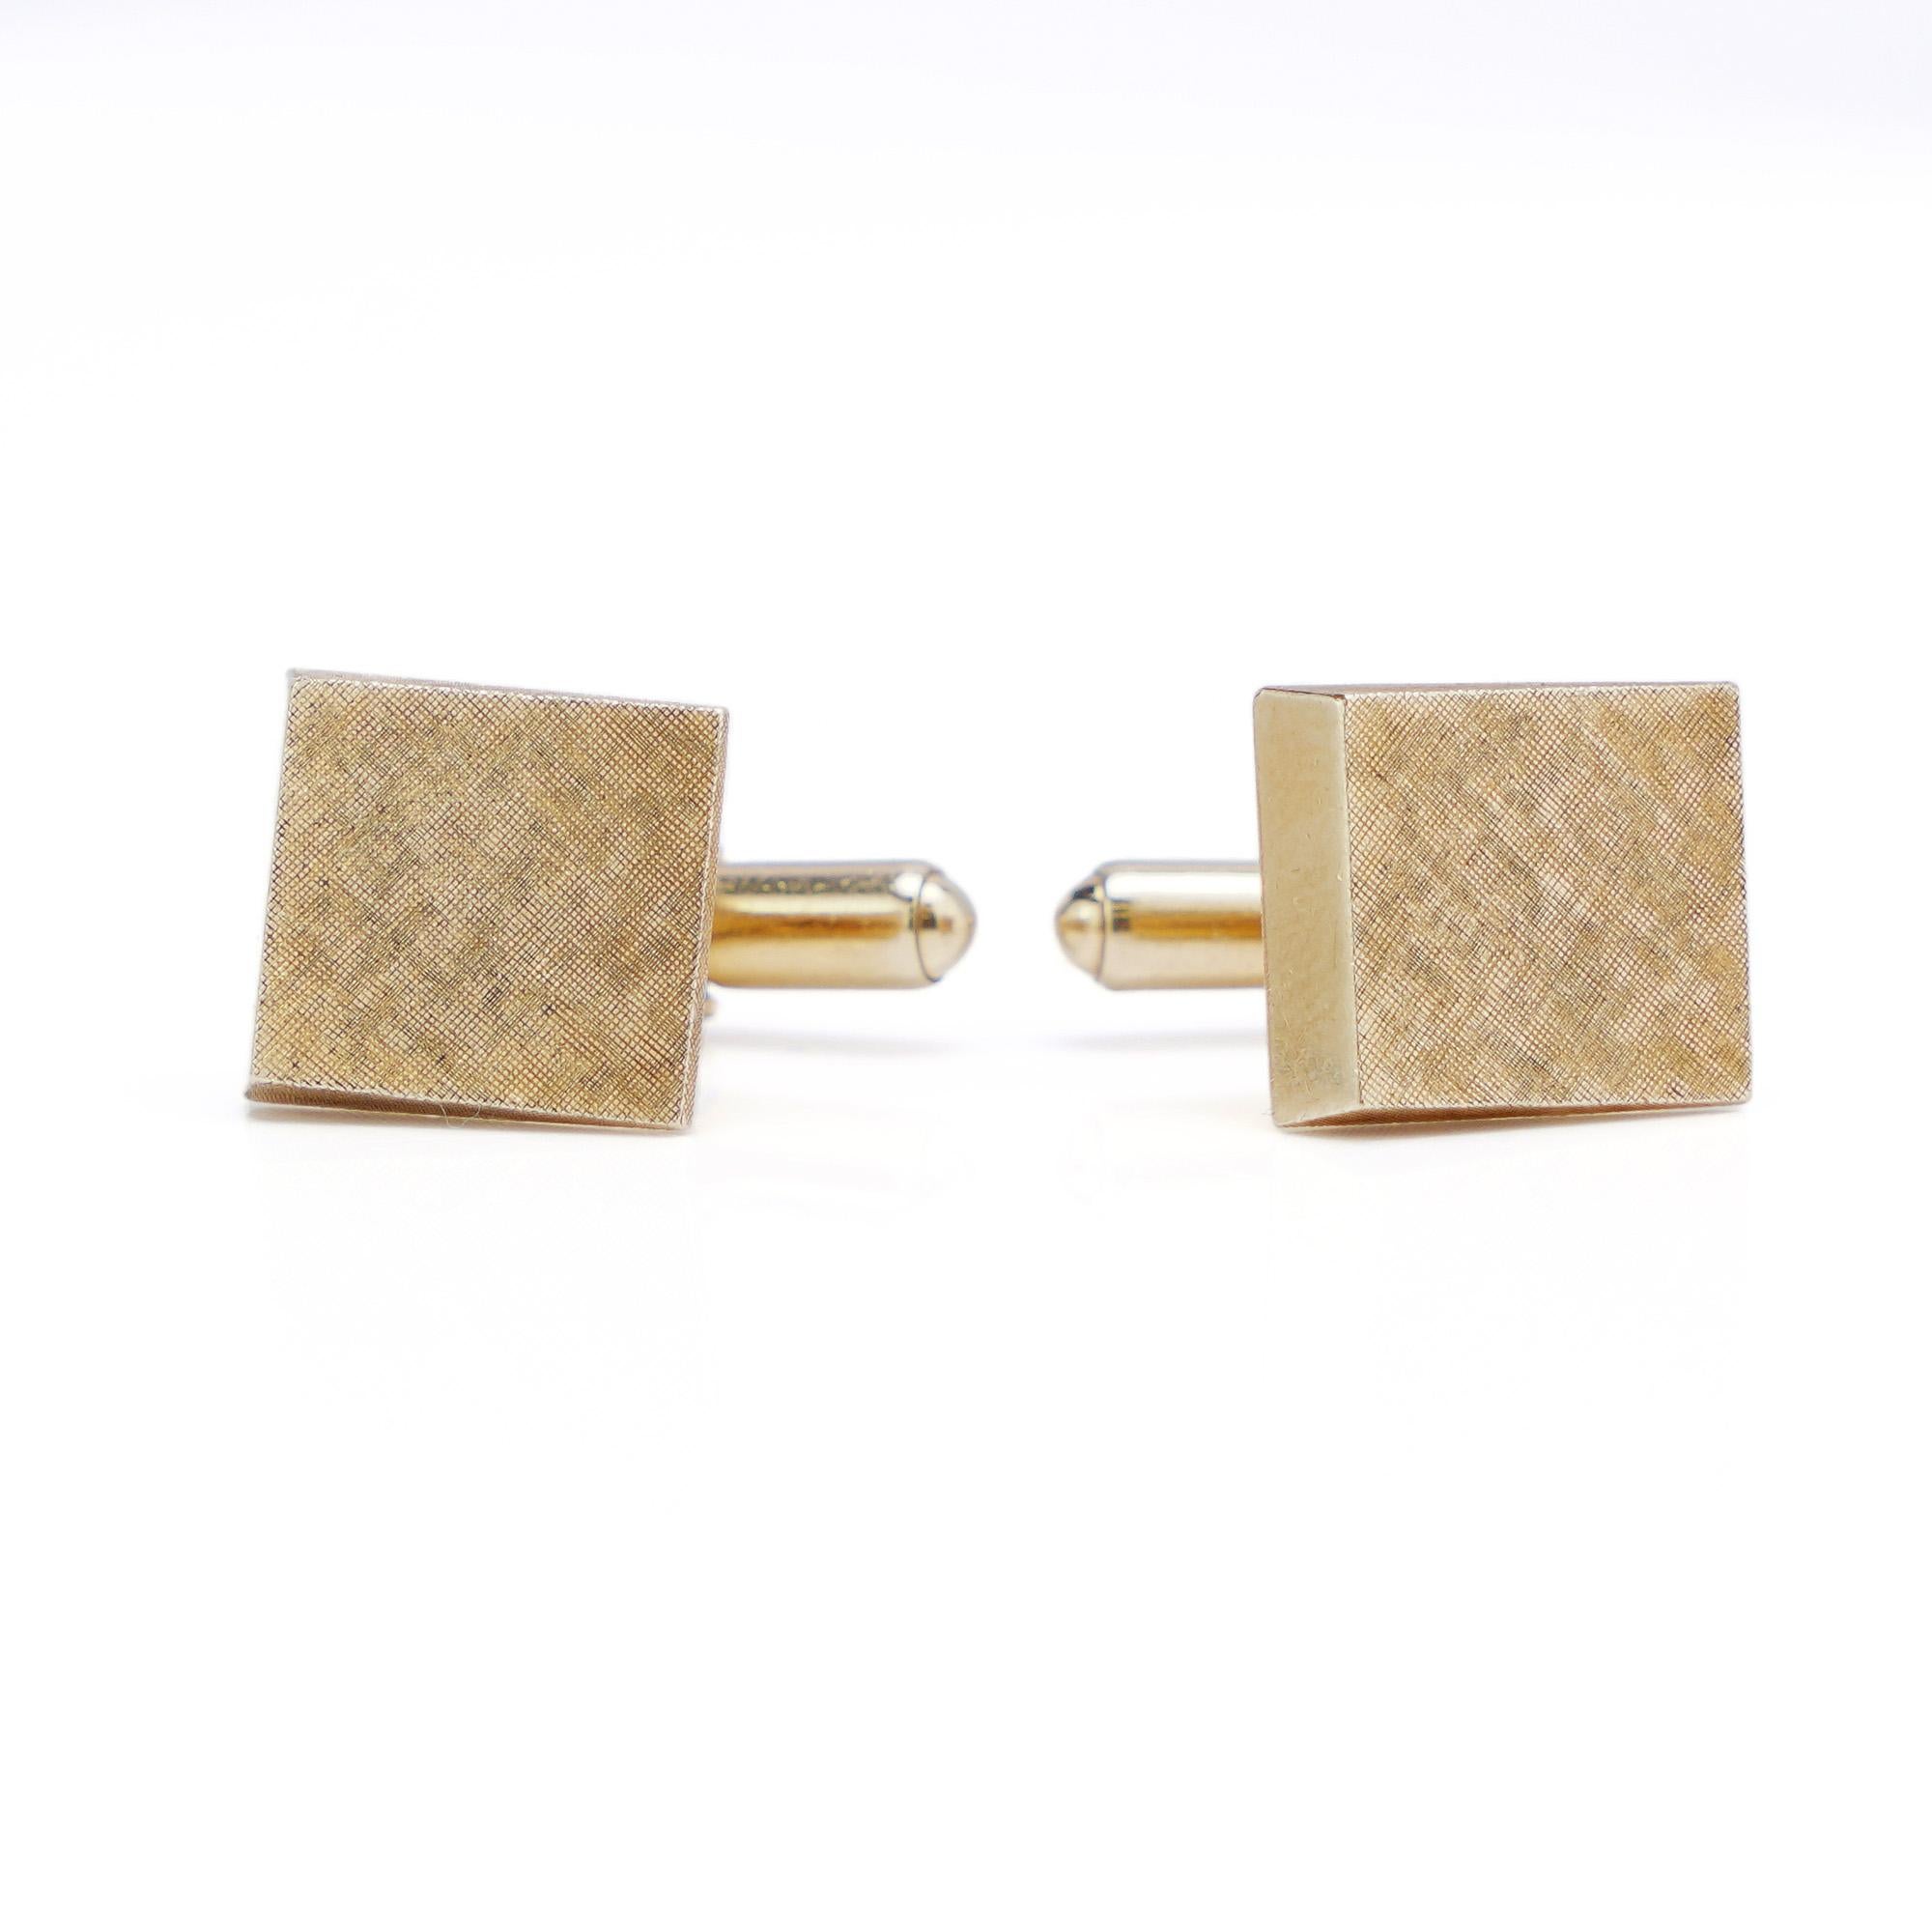 Tiffany & Co. 14kt. Yellow Gold Rectangle-Shaped Florentine Finish Cufflinks In Good Condition For Sale In Braintree, GB